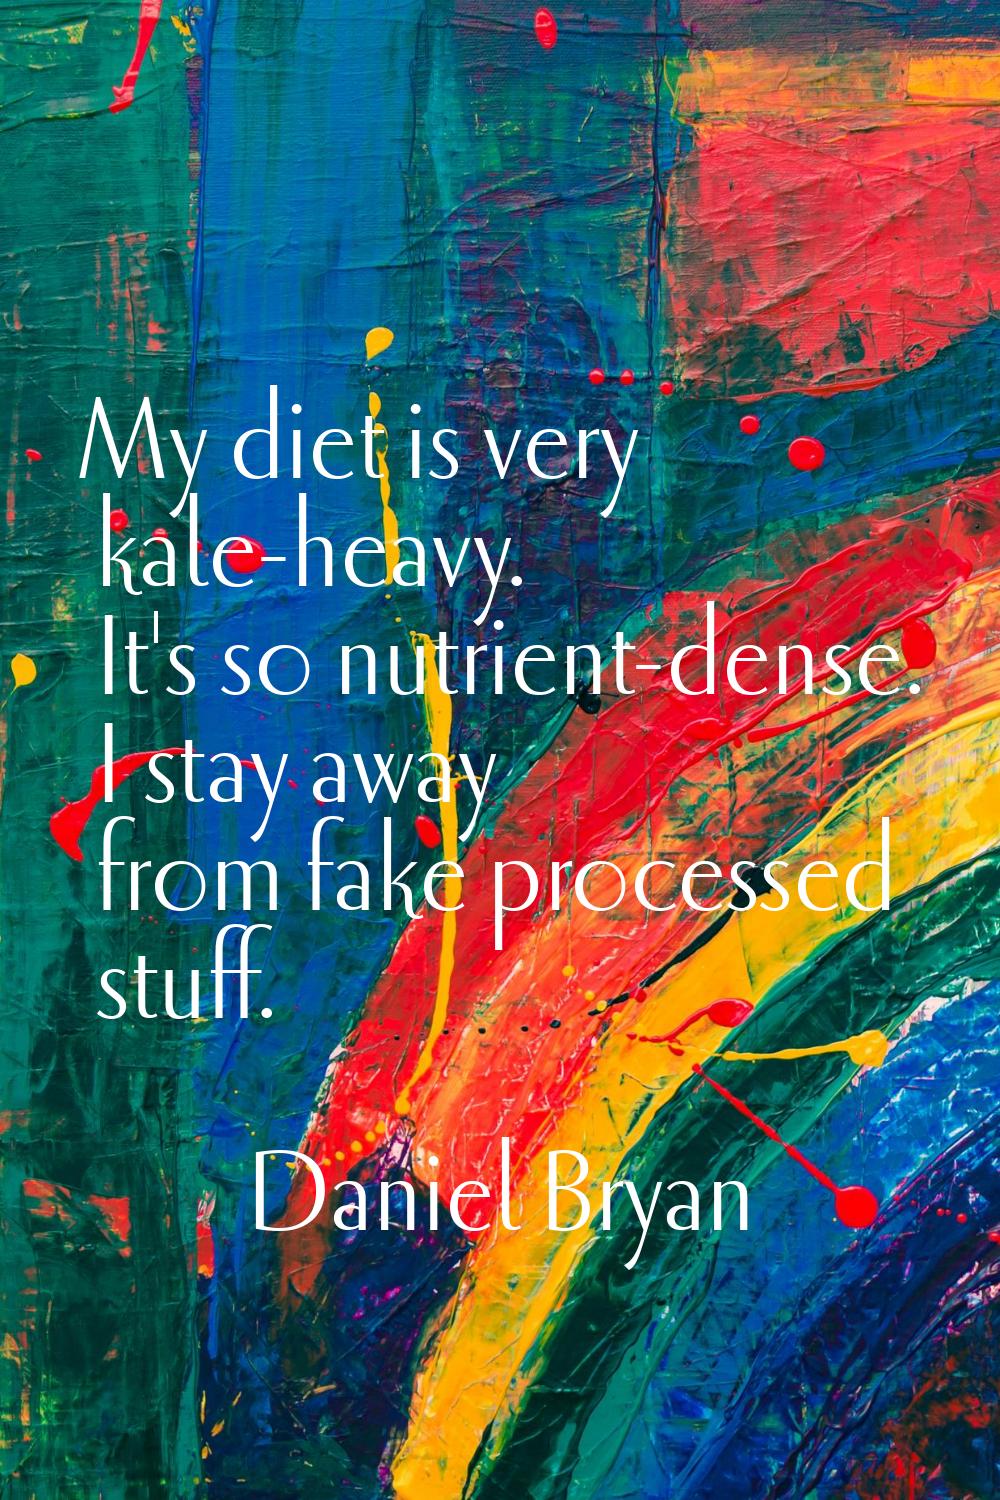 My diet is very kale-heavy. It's so nutrient-dense. I stay away from fake processed stuff.